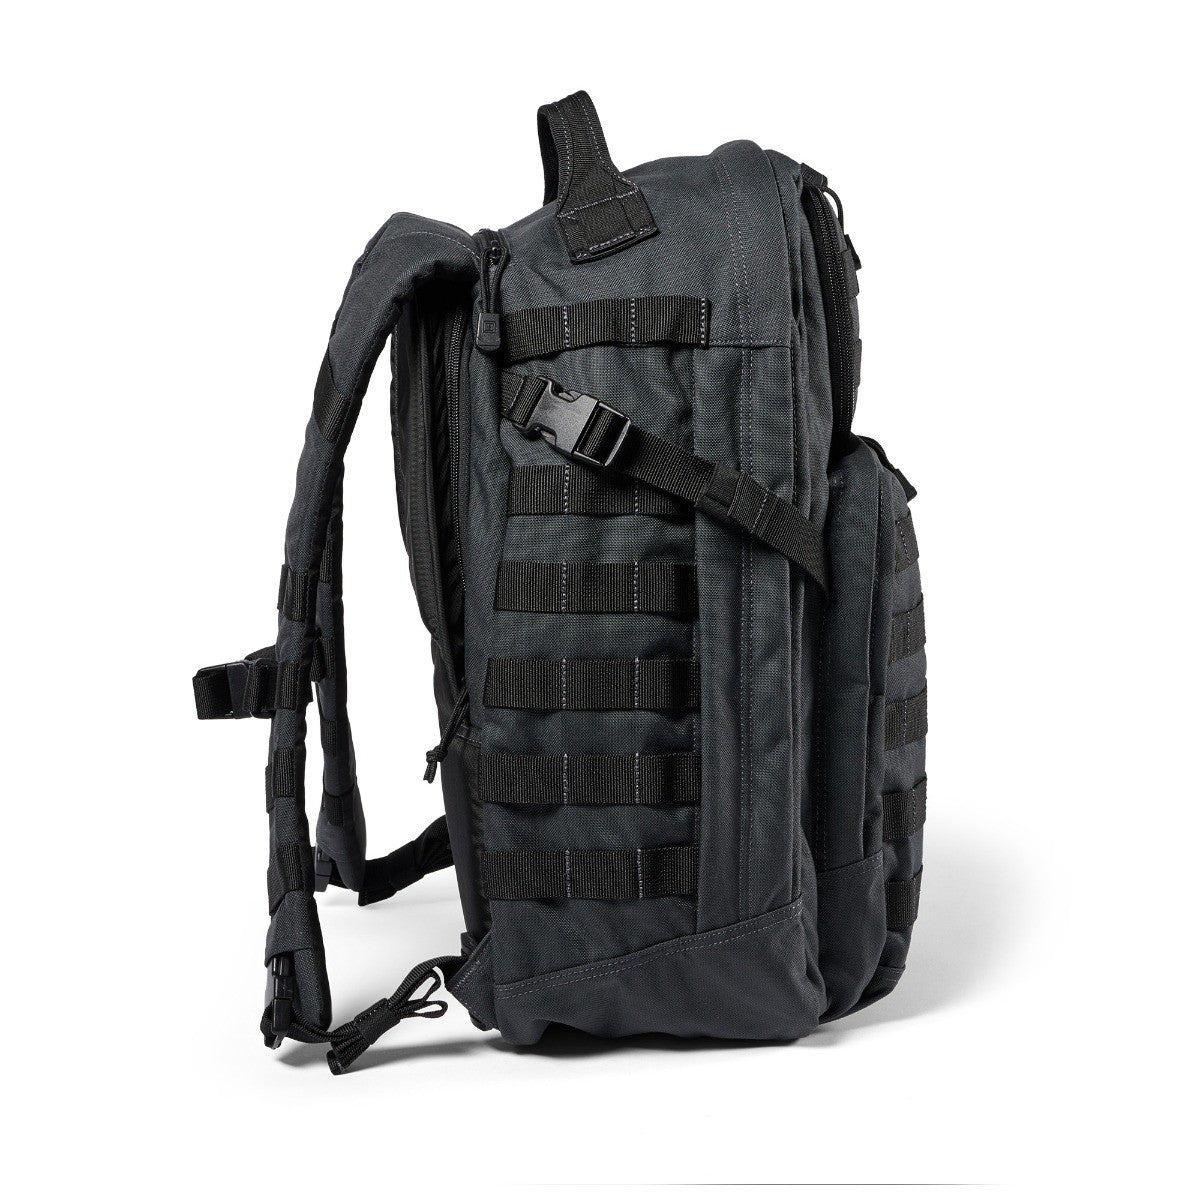 Mochila 5.11 Rush 24 Backpack 37L 2.0 Doble tap lateral